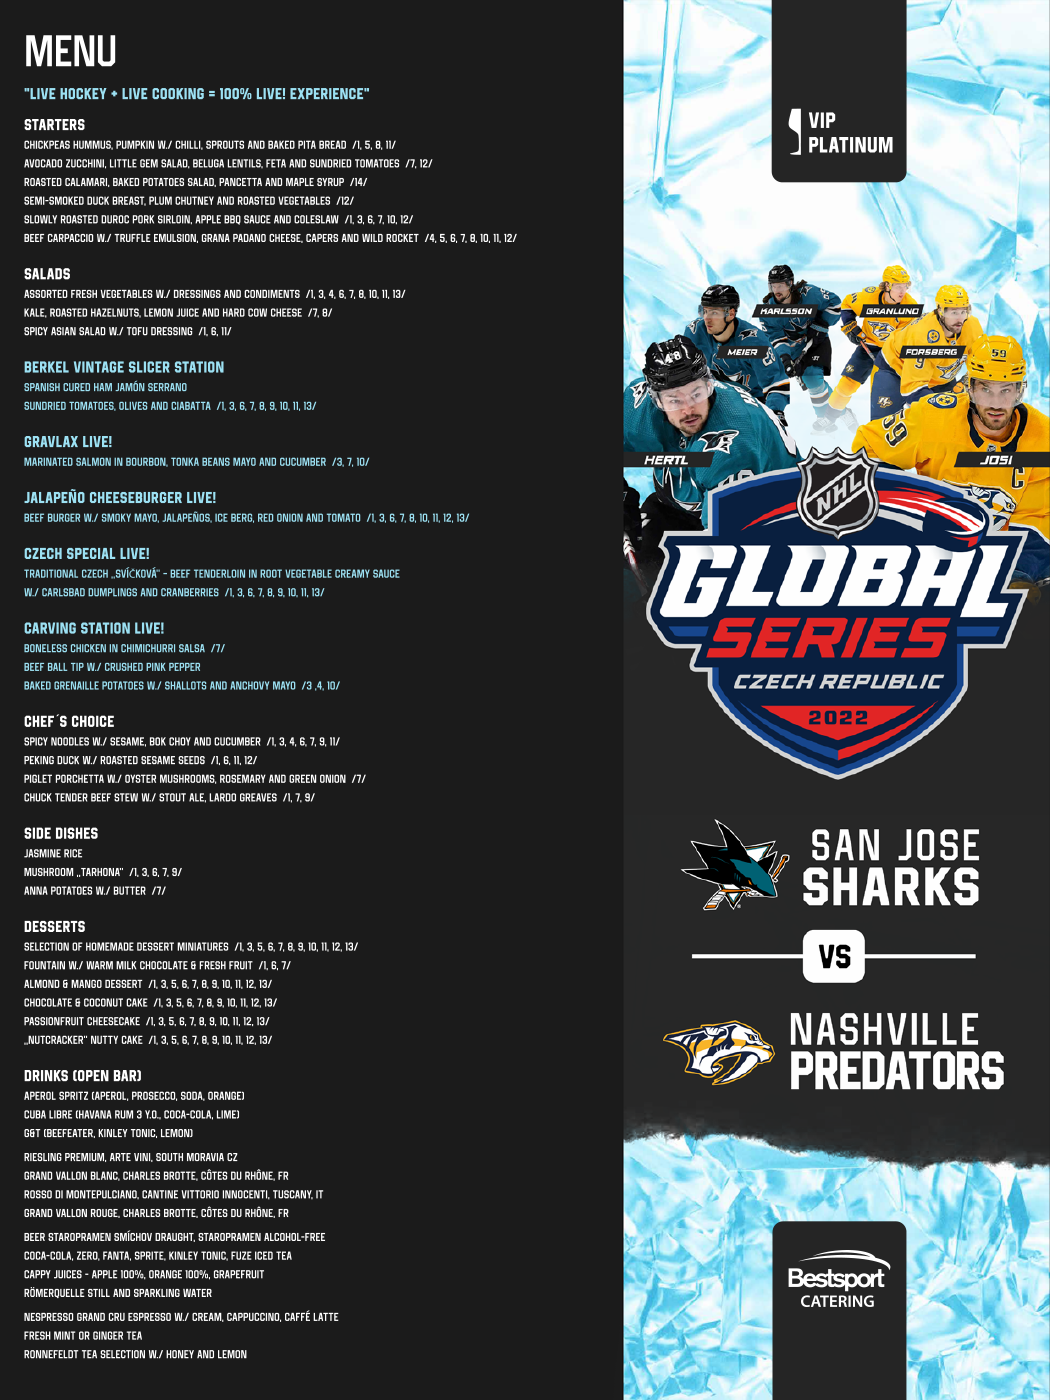 picture 2022 NHL GLOBAL SERIES-Package Tickets